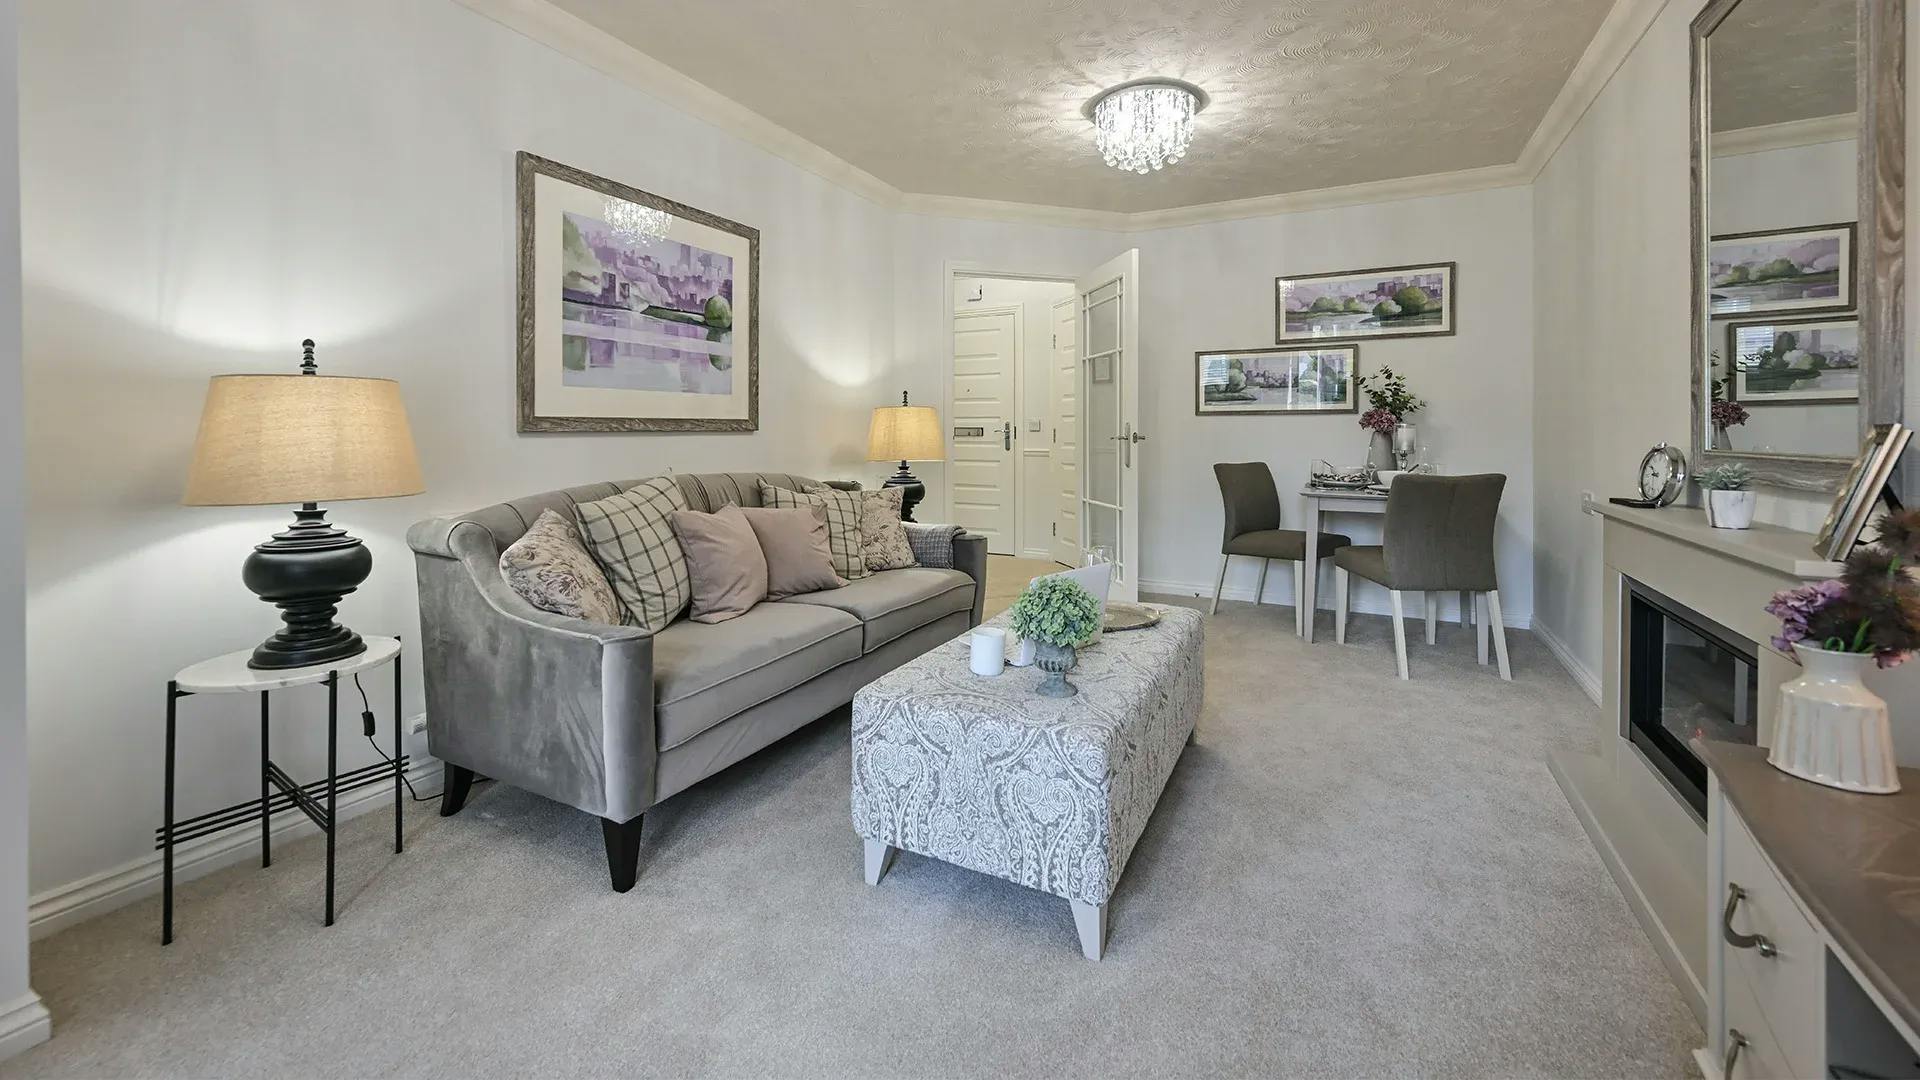 Typical Lounge of William Lodge Retirement Development in Malmesbury, Wiltshire